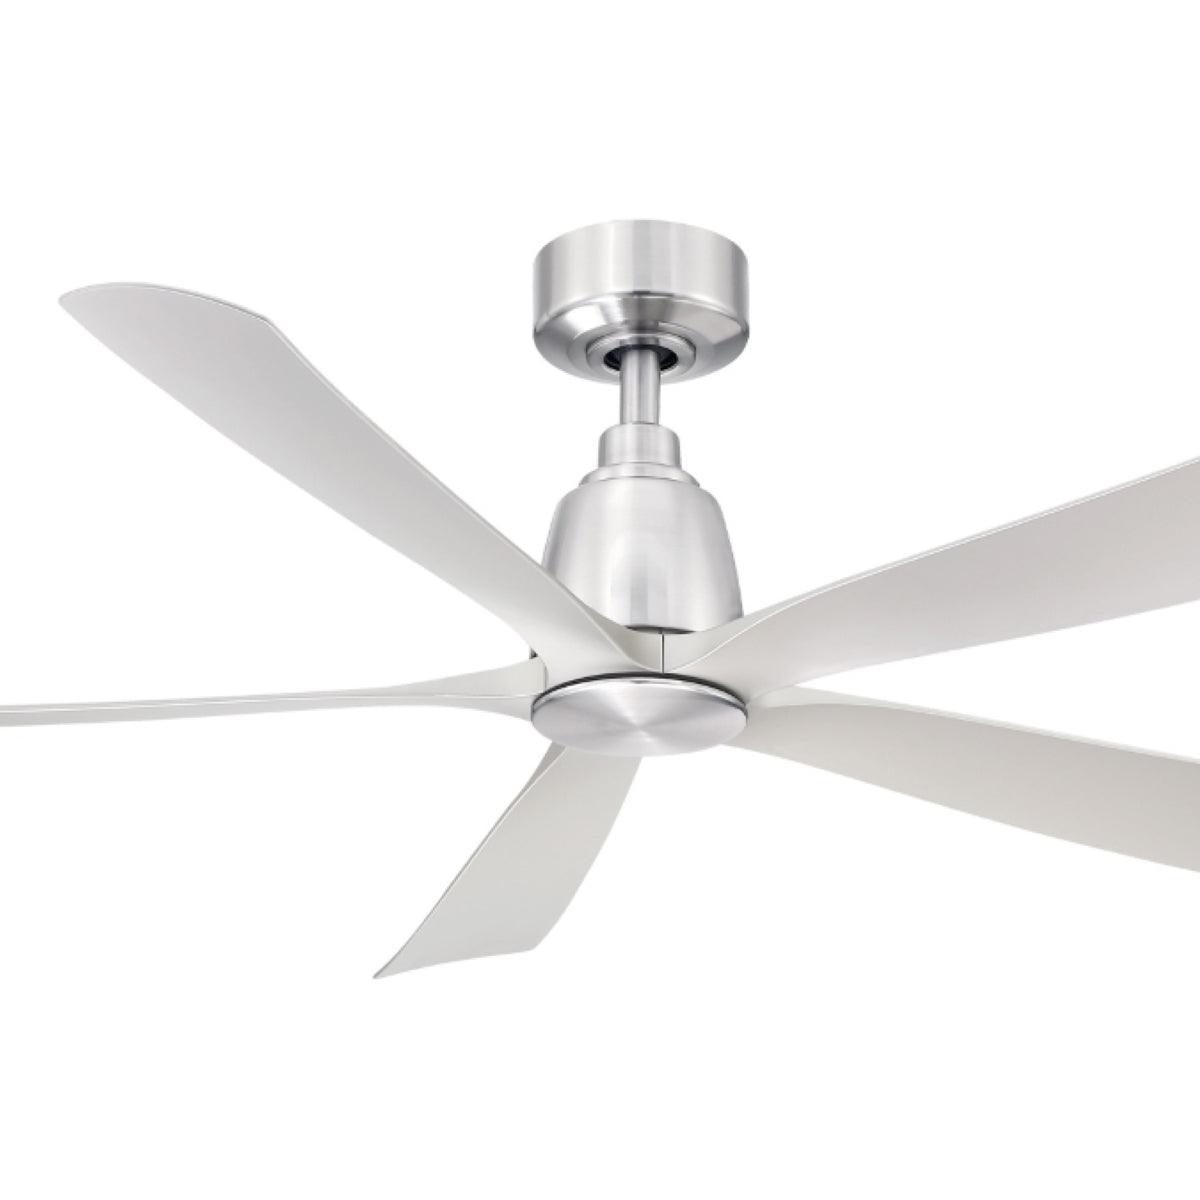 Kute5 52 Inch 5 Blades Indoor/Outdoor Ceiling Fan With Remote, Brushed Nickel Finish - Bees Lighting